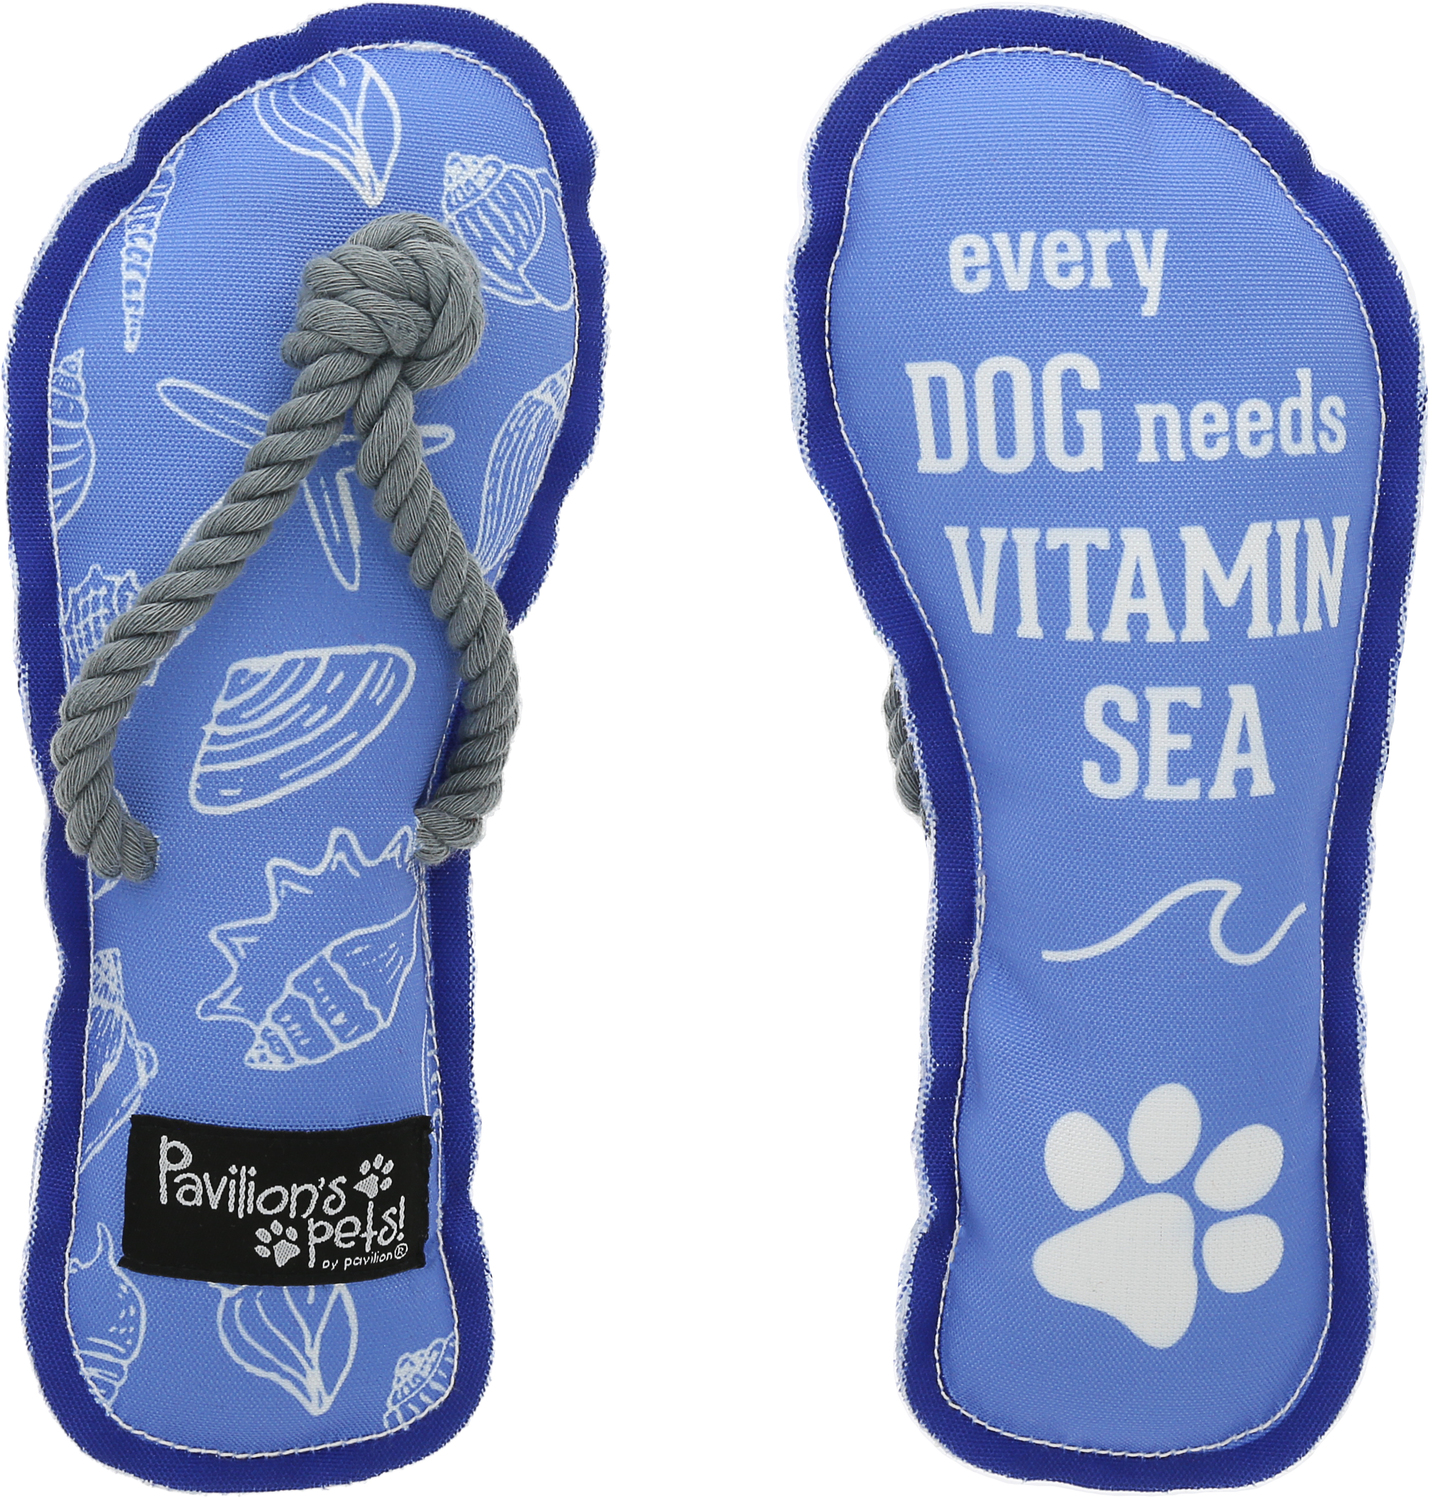 Vitamin Sea by Pavilion's Pets - Vitamin Sea - 9" Canvas Dog Toy with Rope